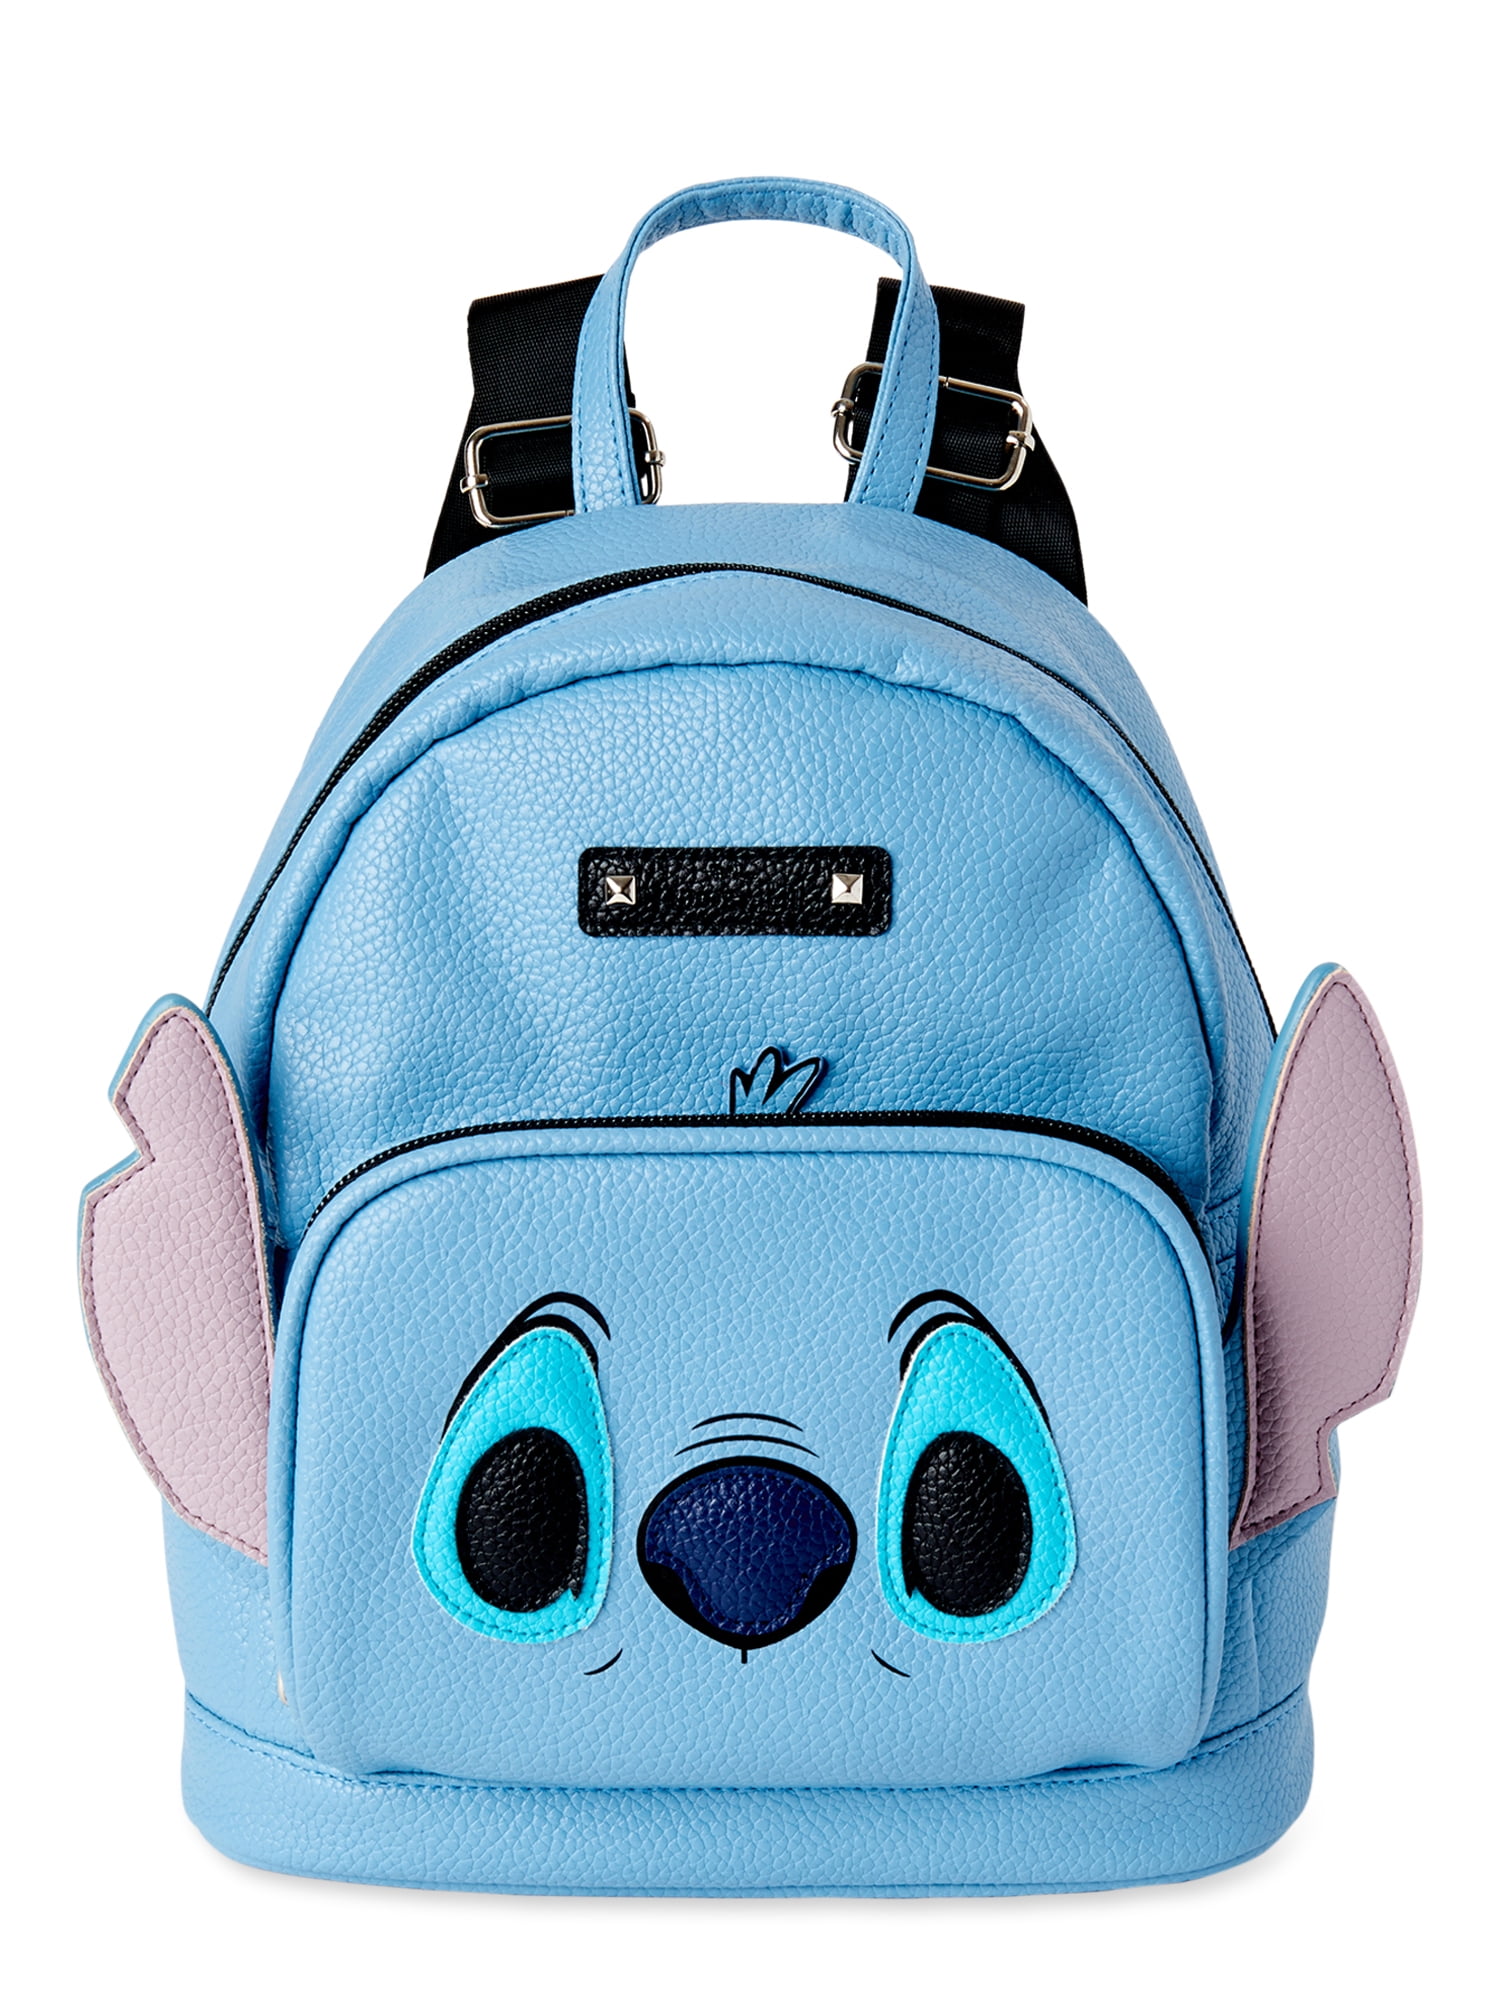 New Includes Wallet Disney Lilo & Stitch Mini Backpack